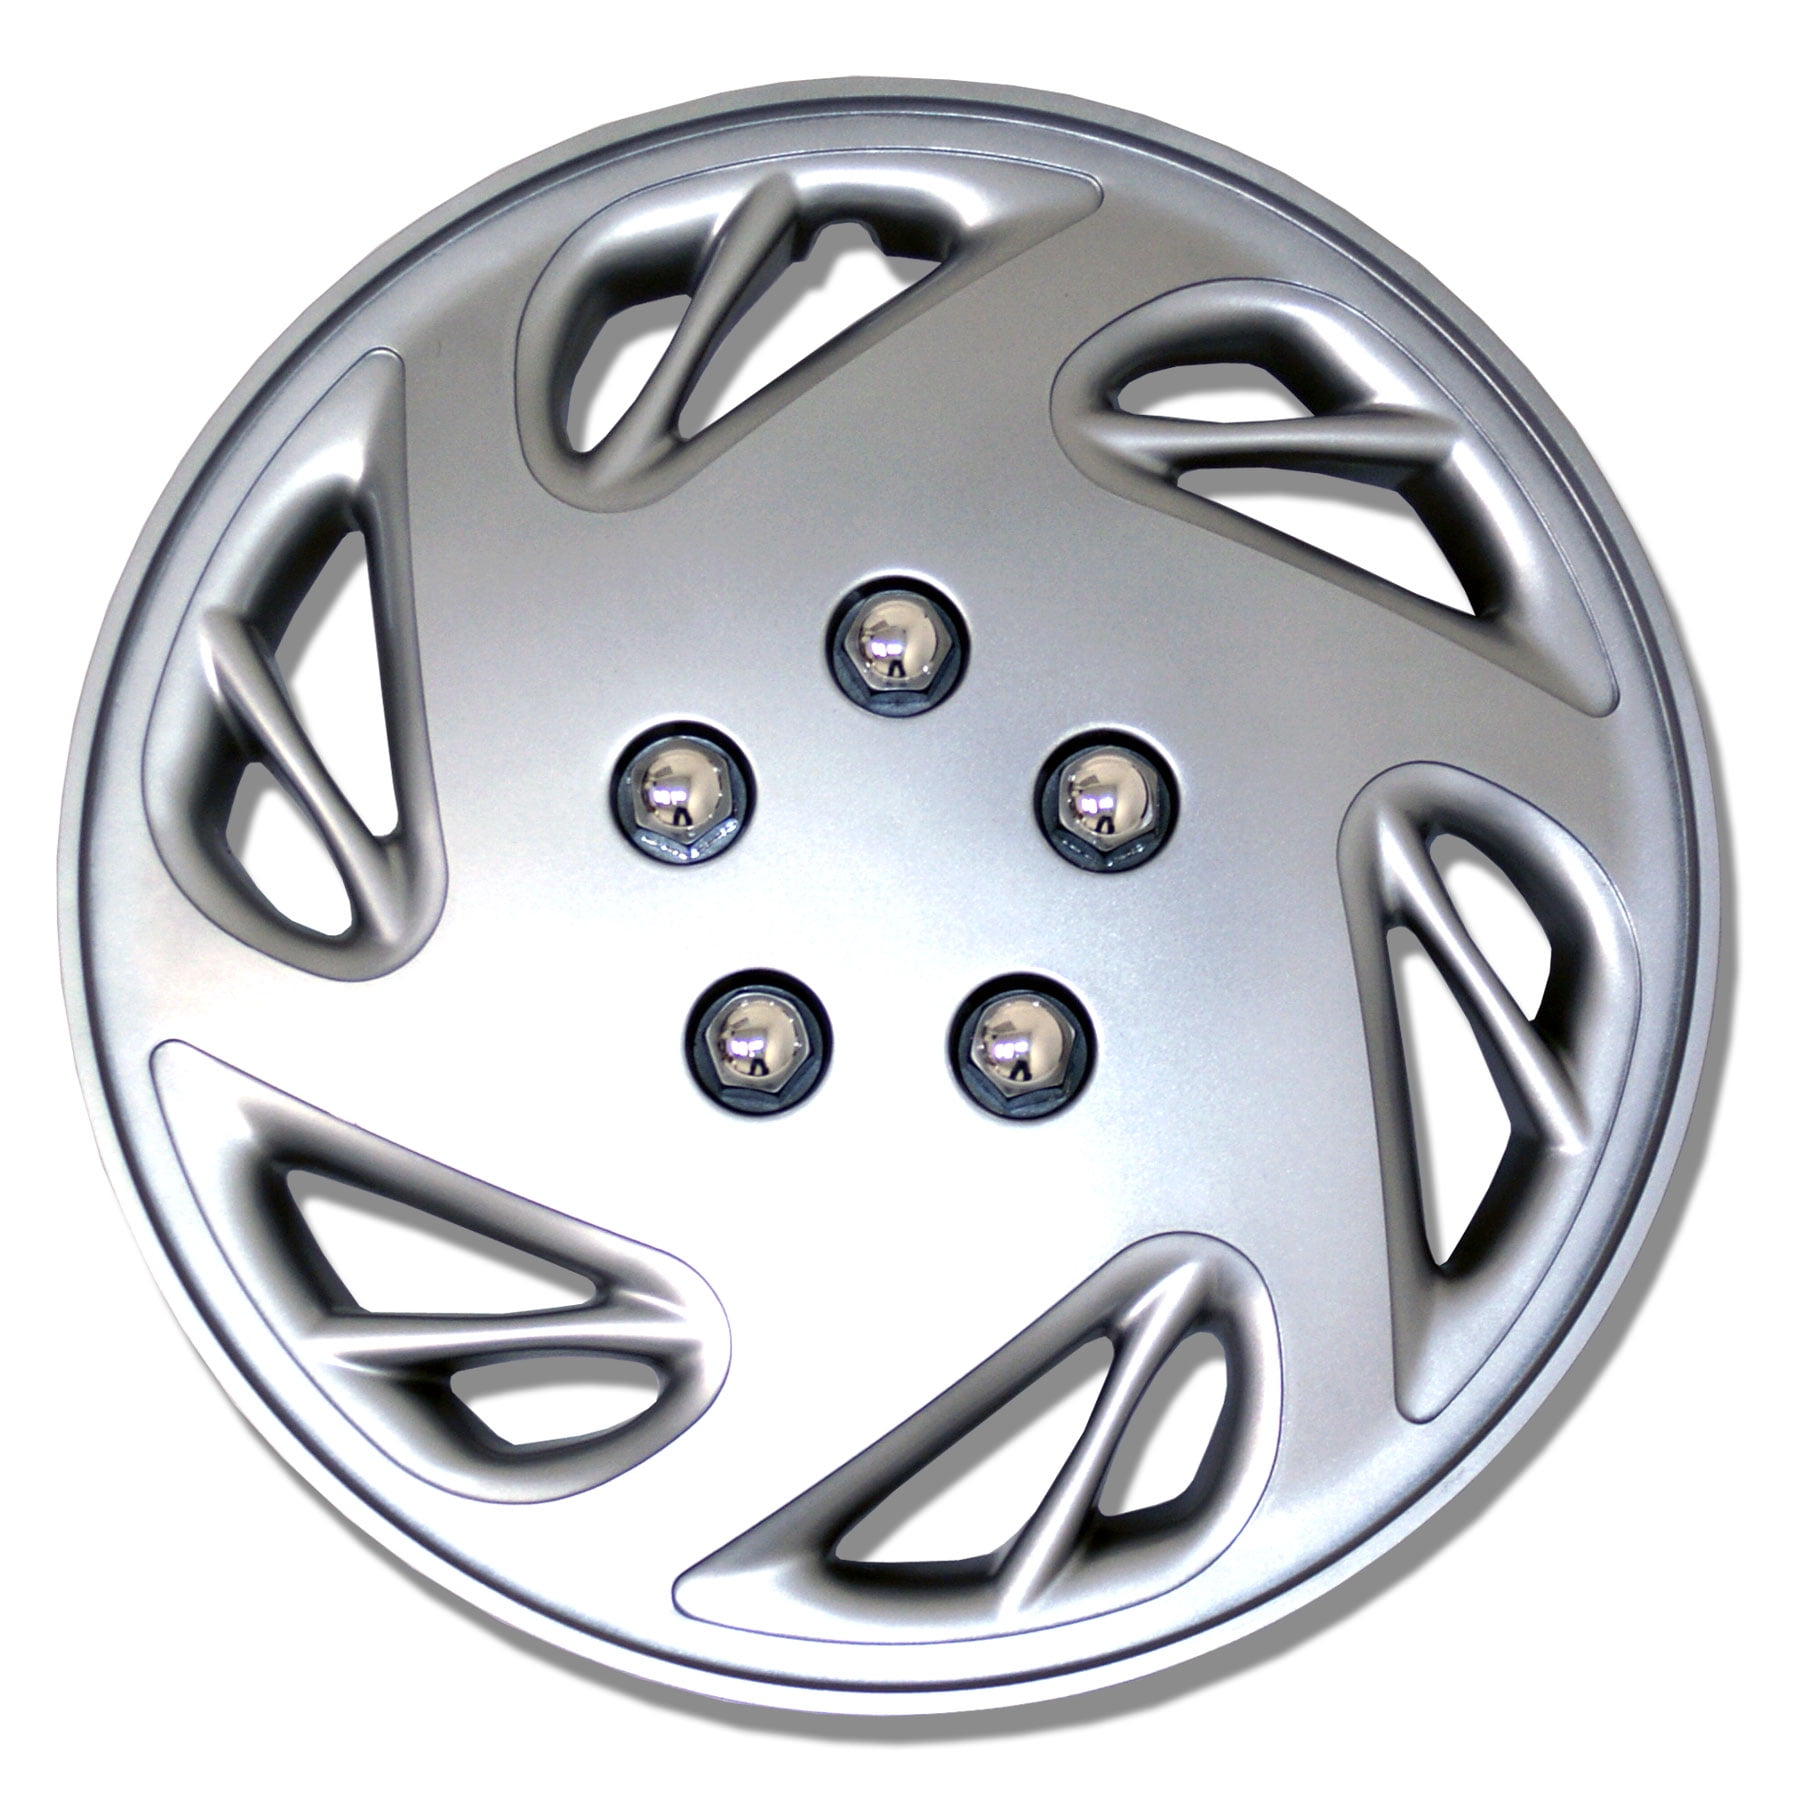 TuningPros WSC-502S15 Hubcaps Wheel Skin Cover 15-Inches Silver Set of 4 